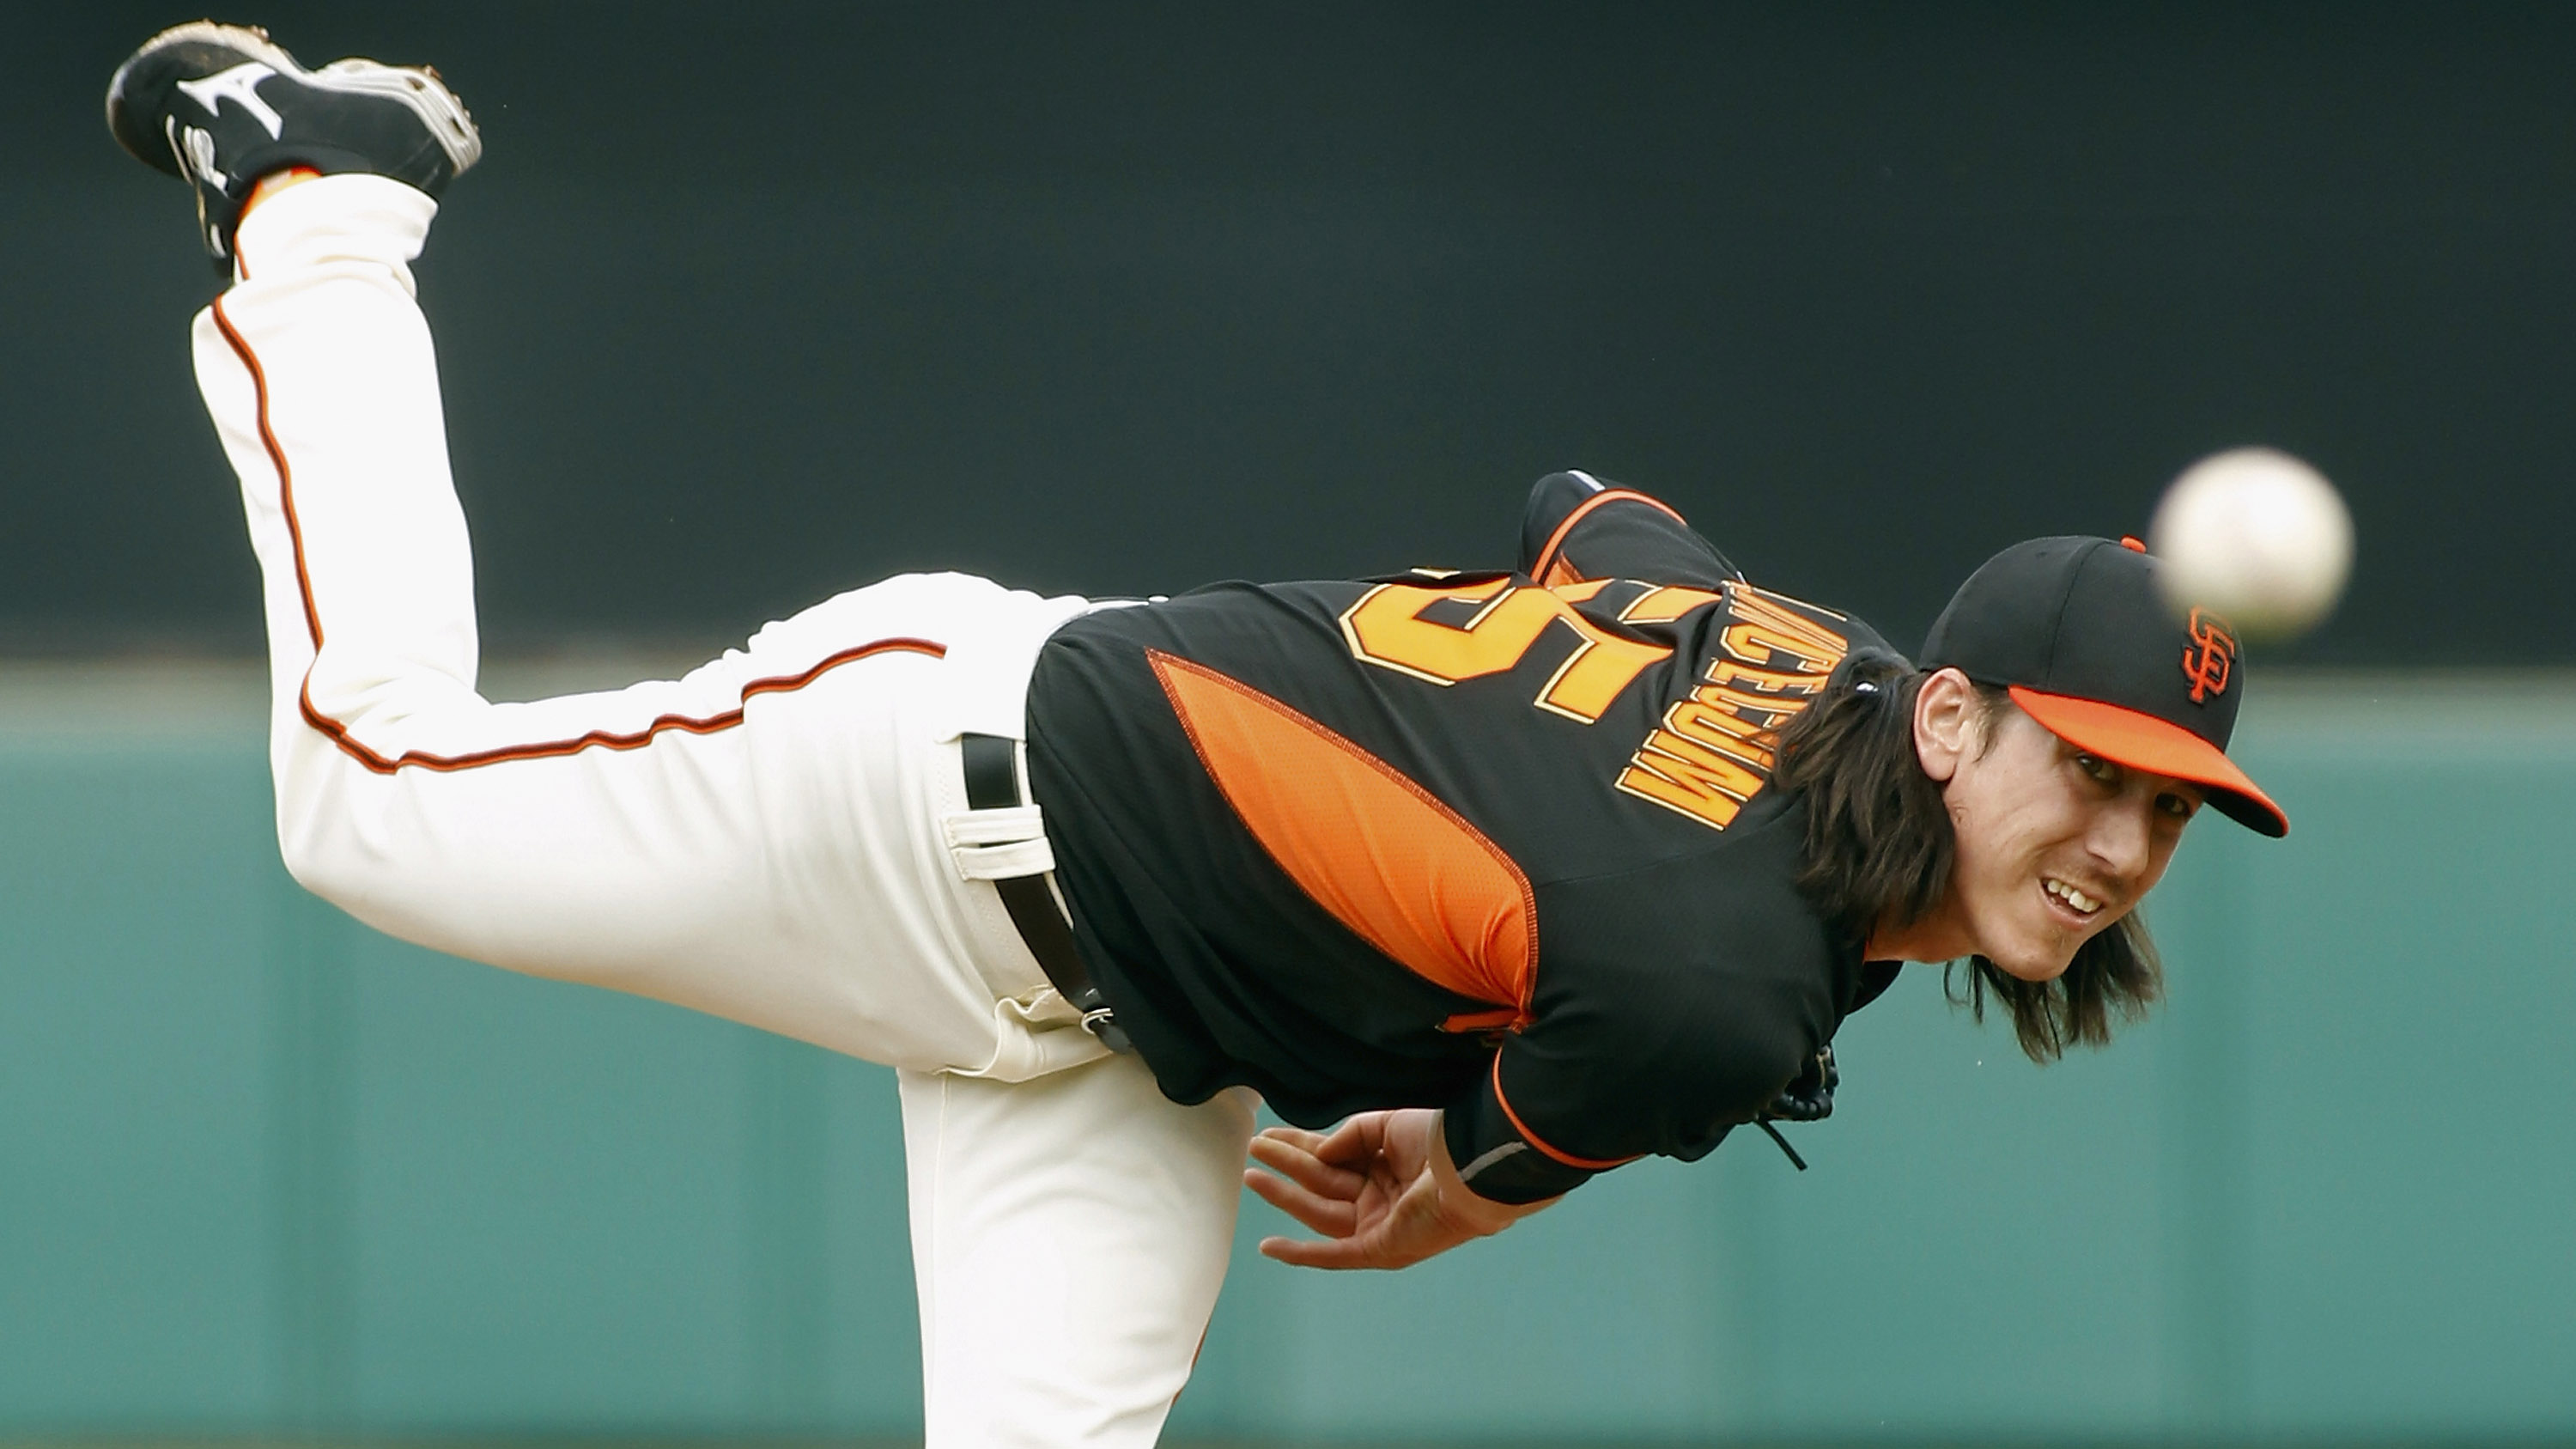 Rangers officially sign Lincecum, with bullpen role in mind